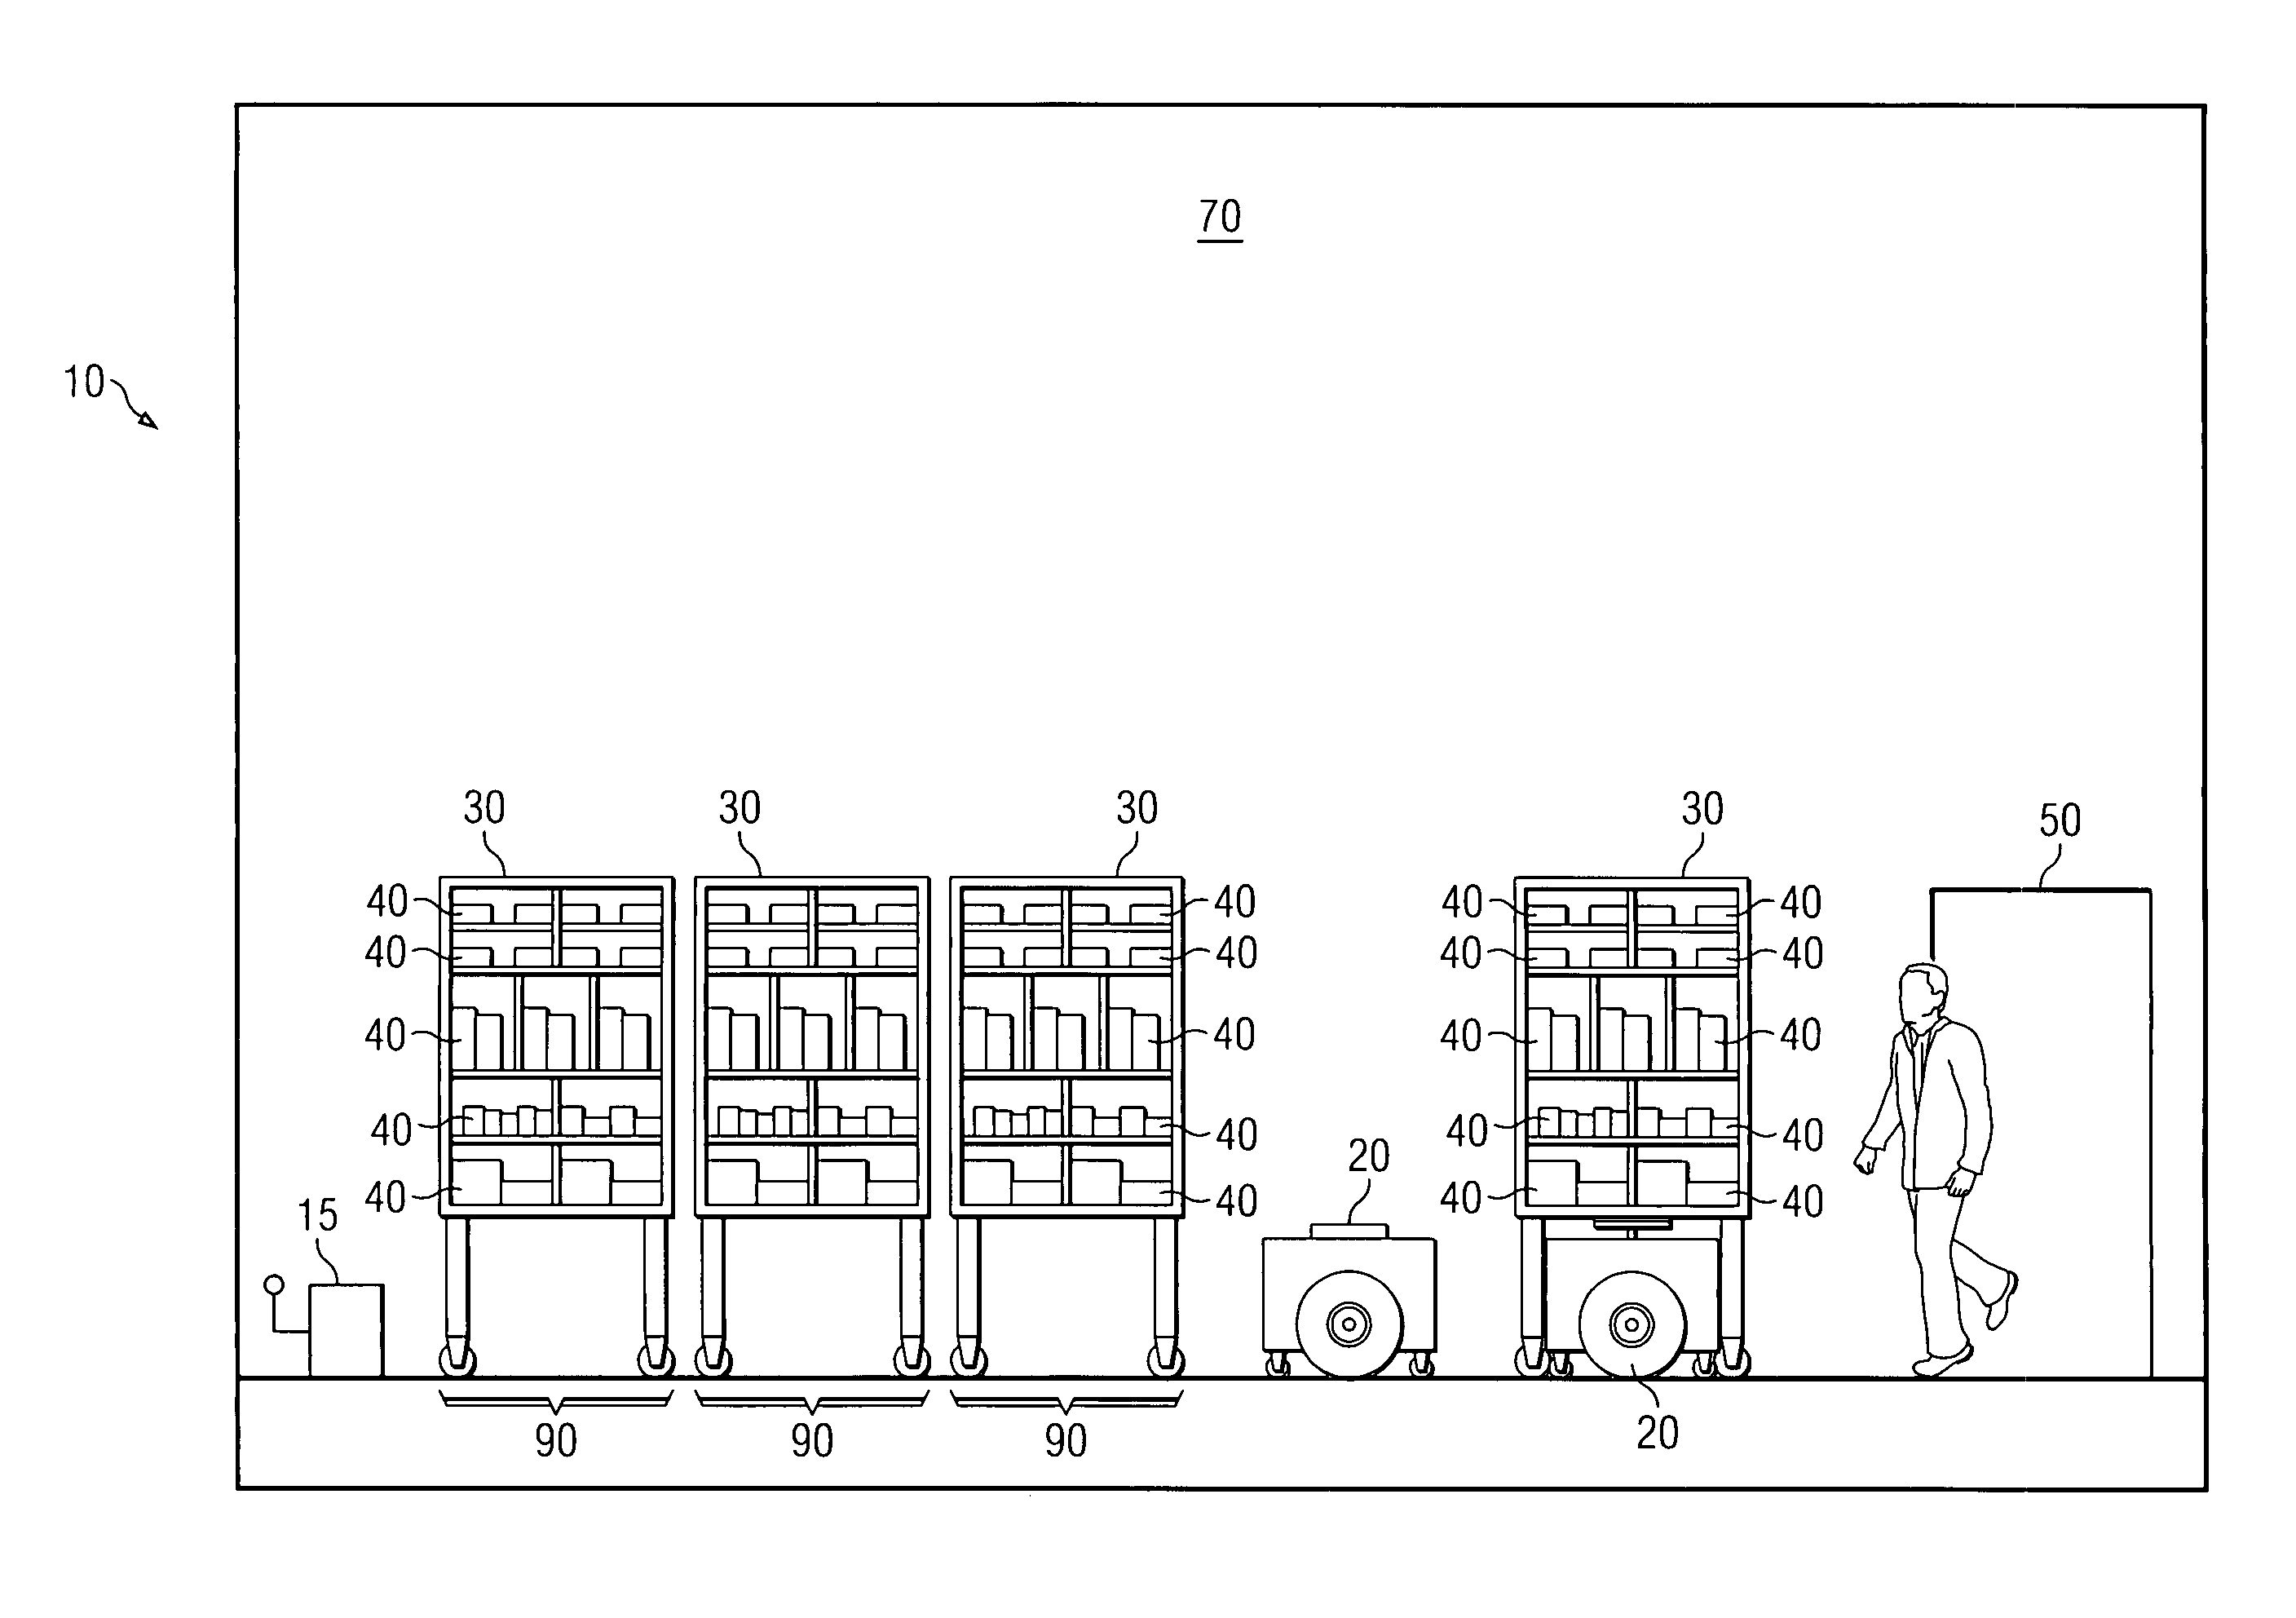 Method and system for replenishing inventory items